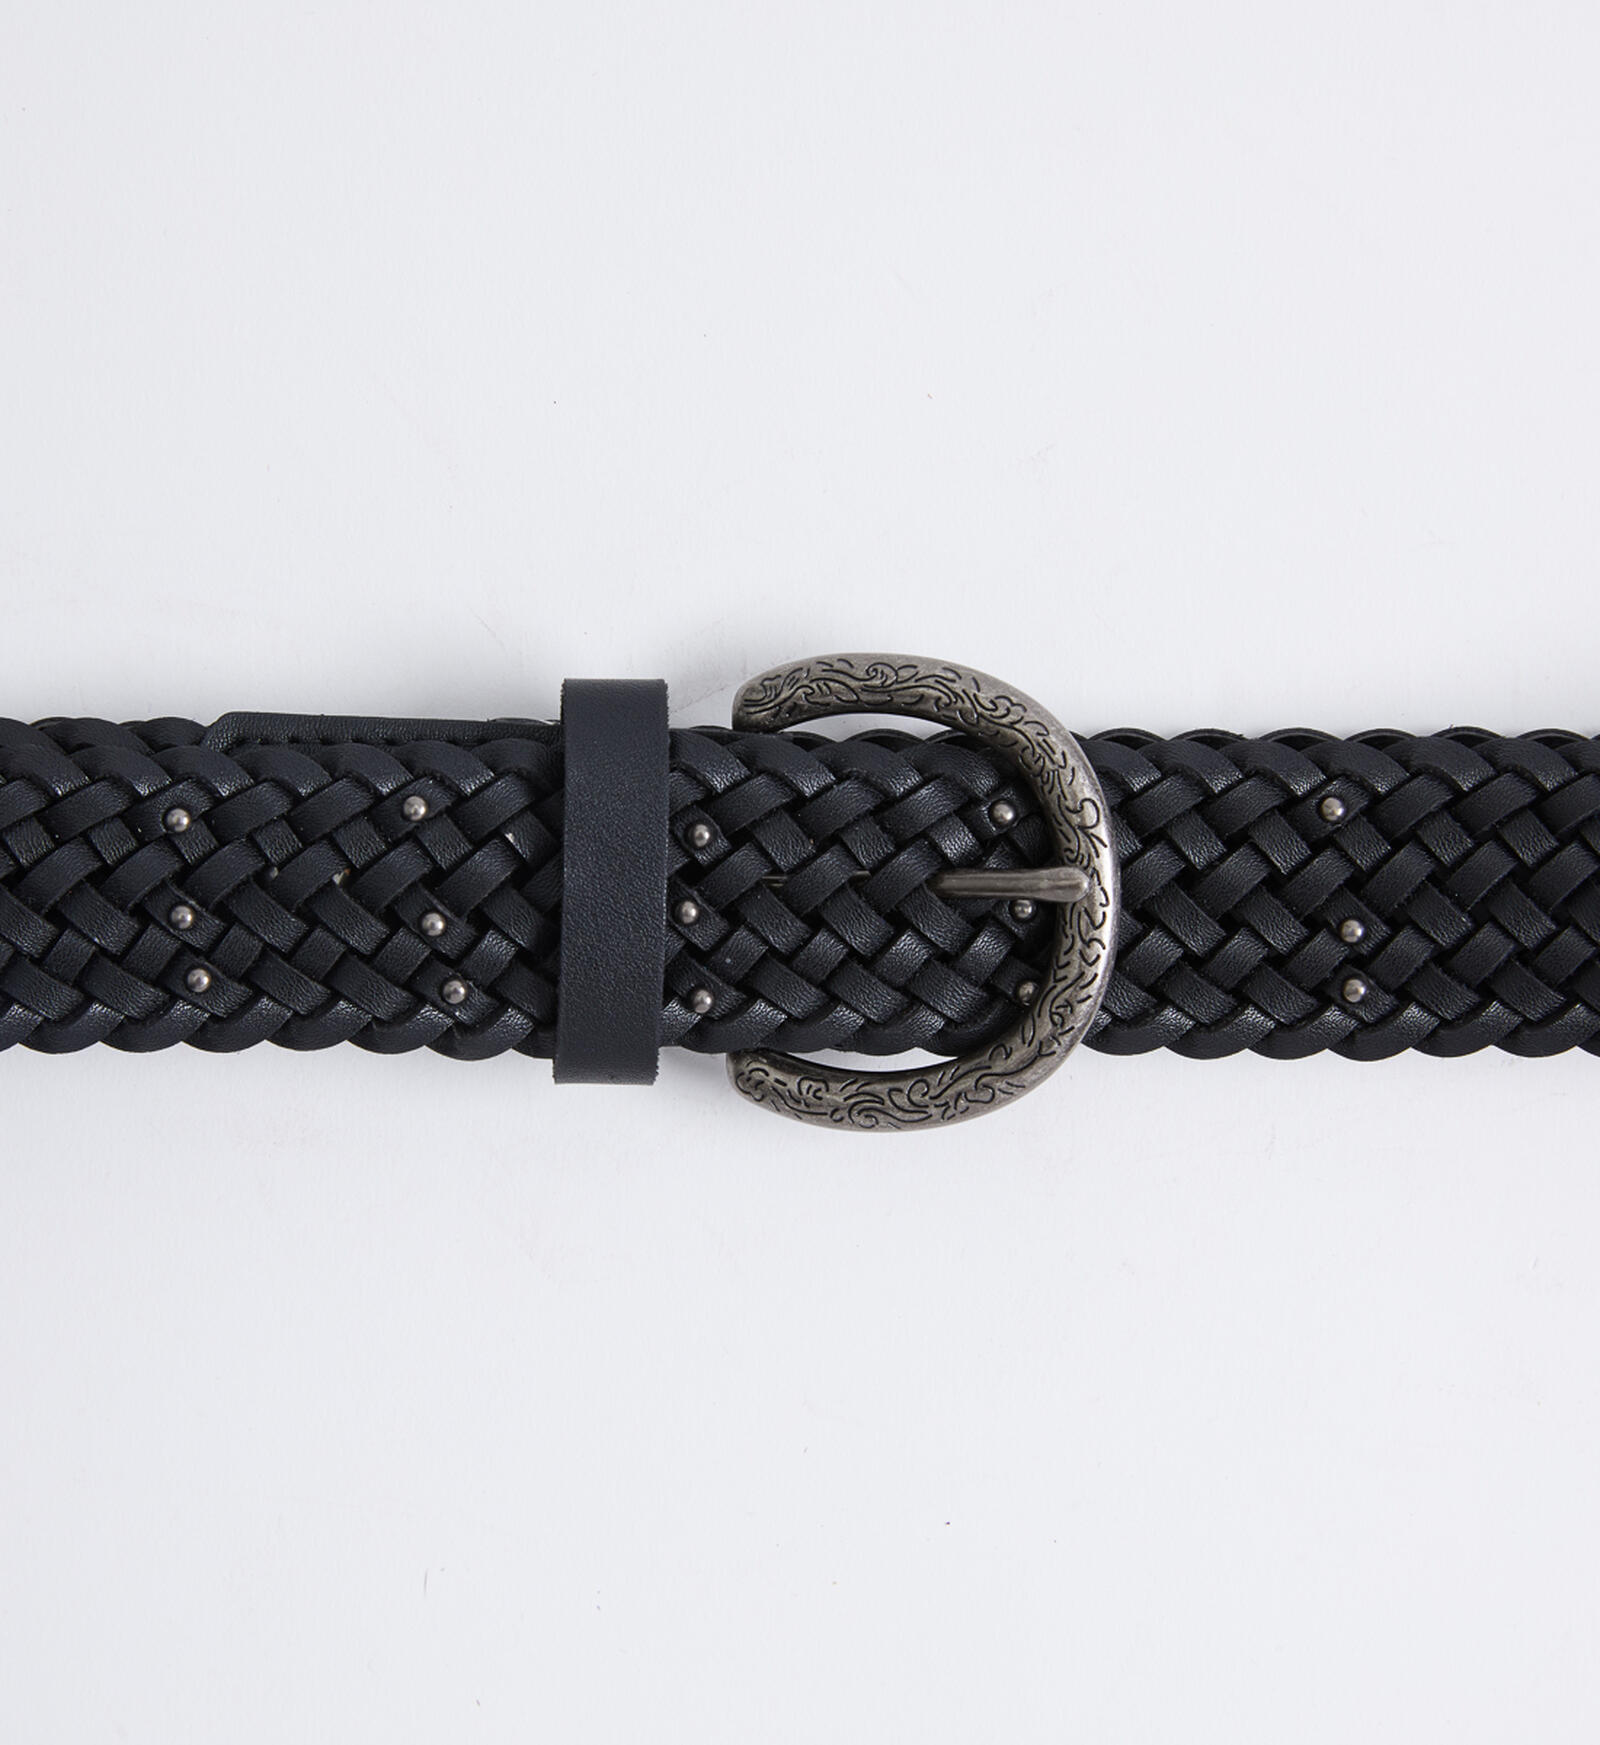 Buy Womens Braided Belt for CAD 50.00